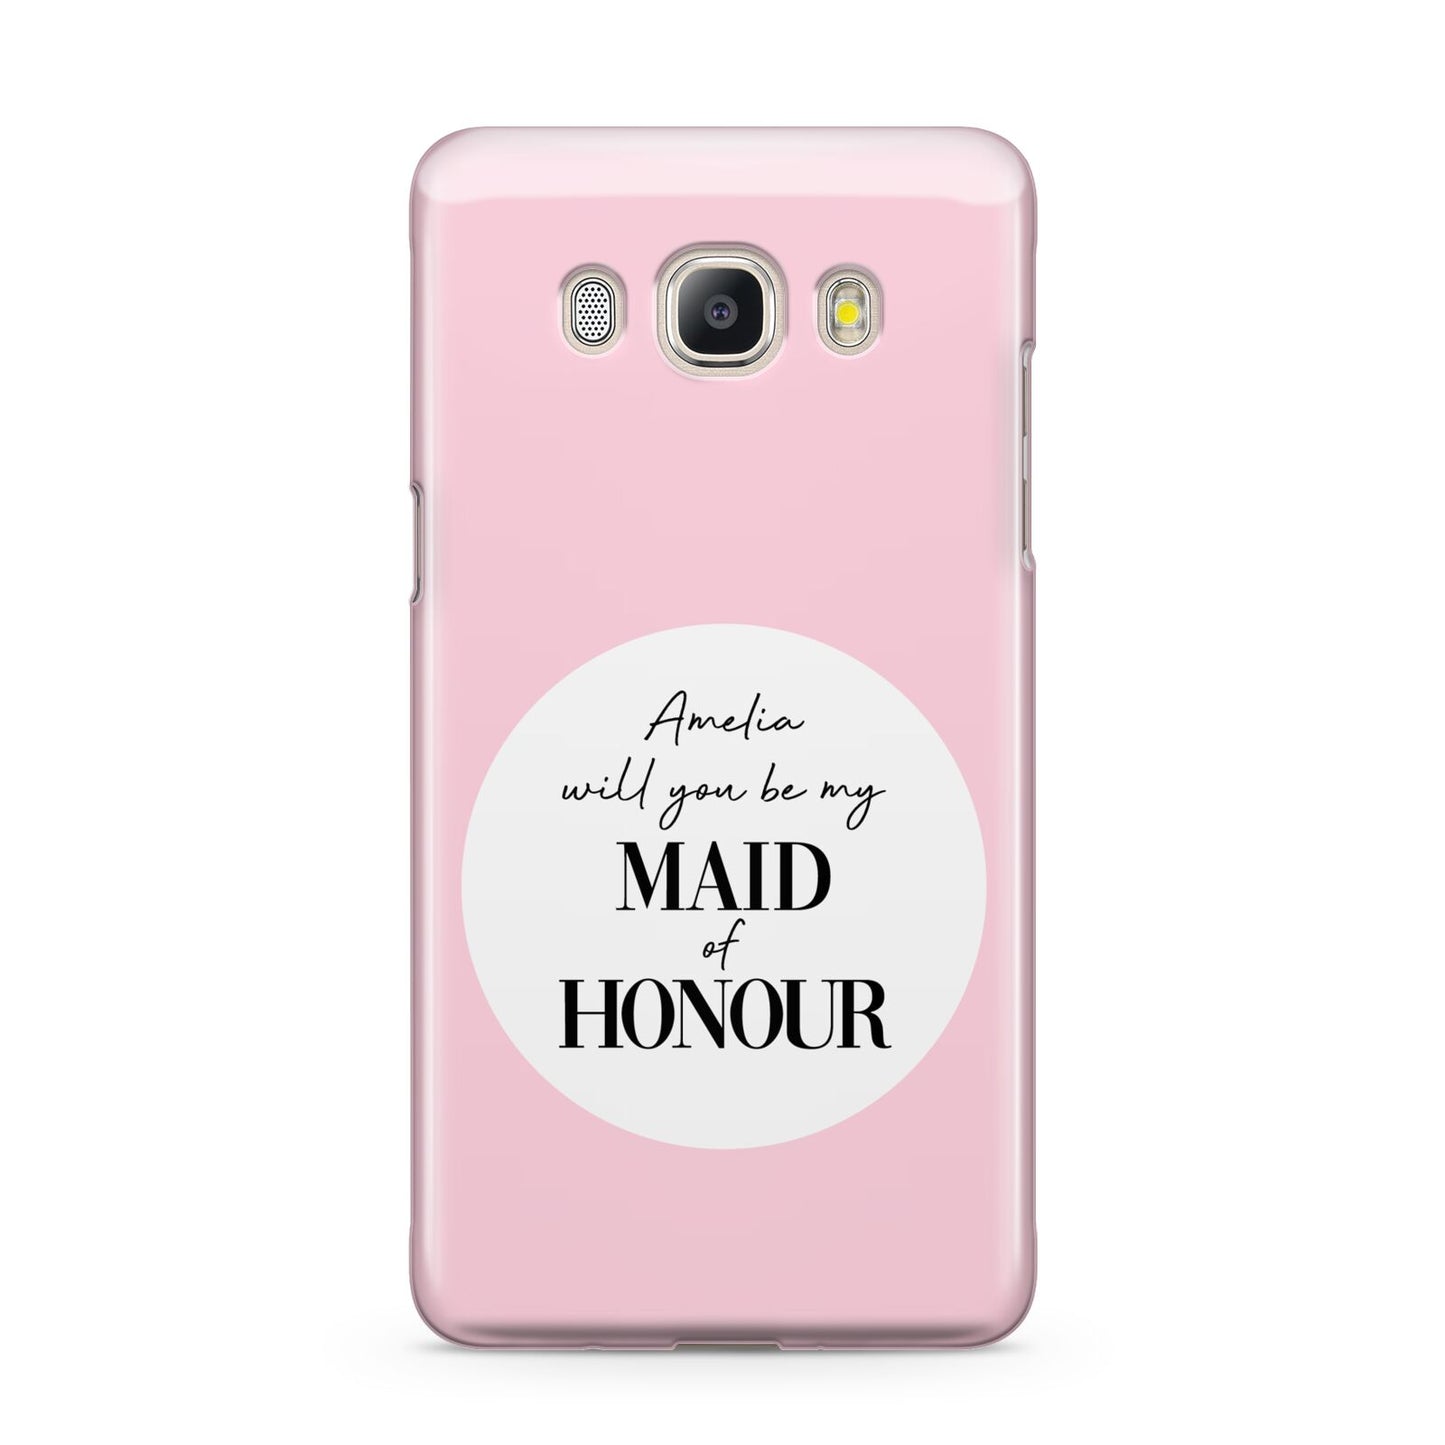 Will You Be My Maid Of Honour Samsung Galaxy J5 2016 Case